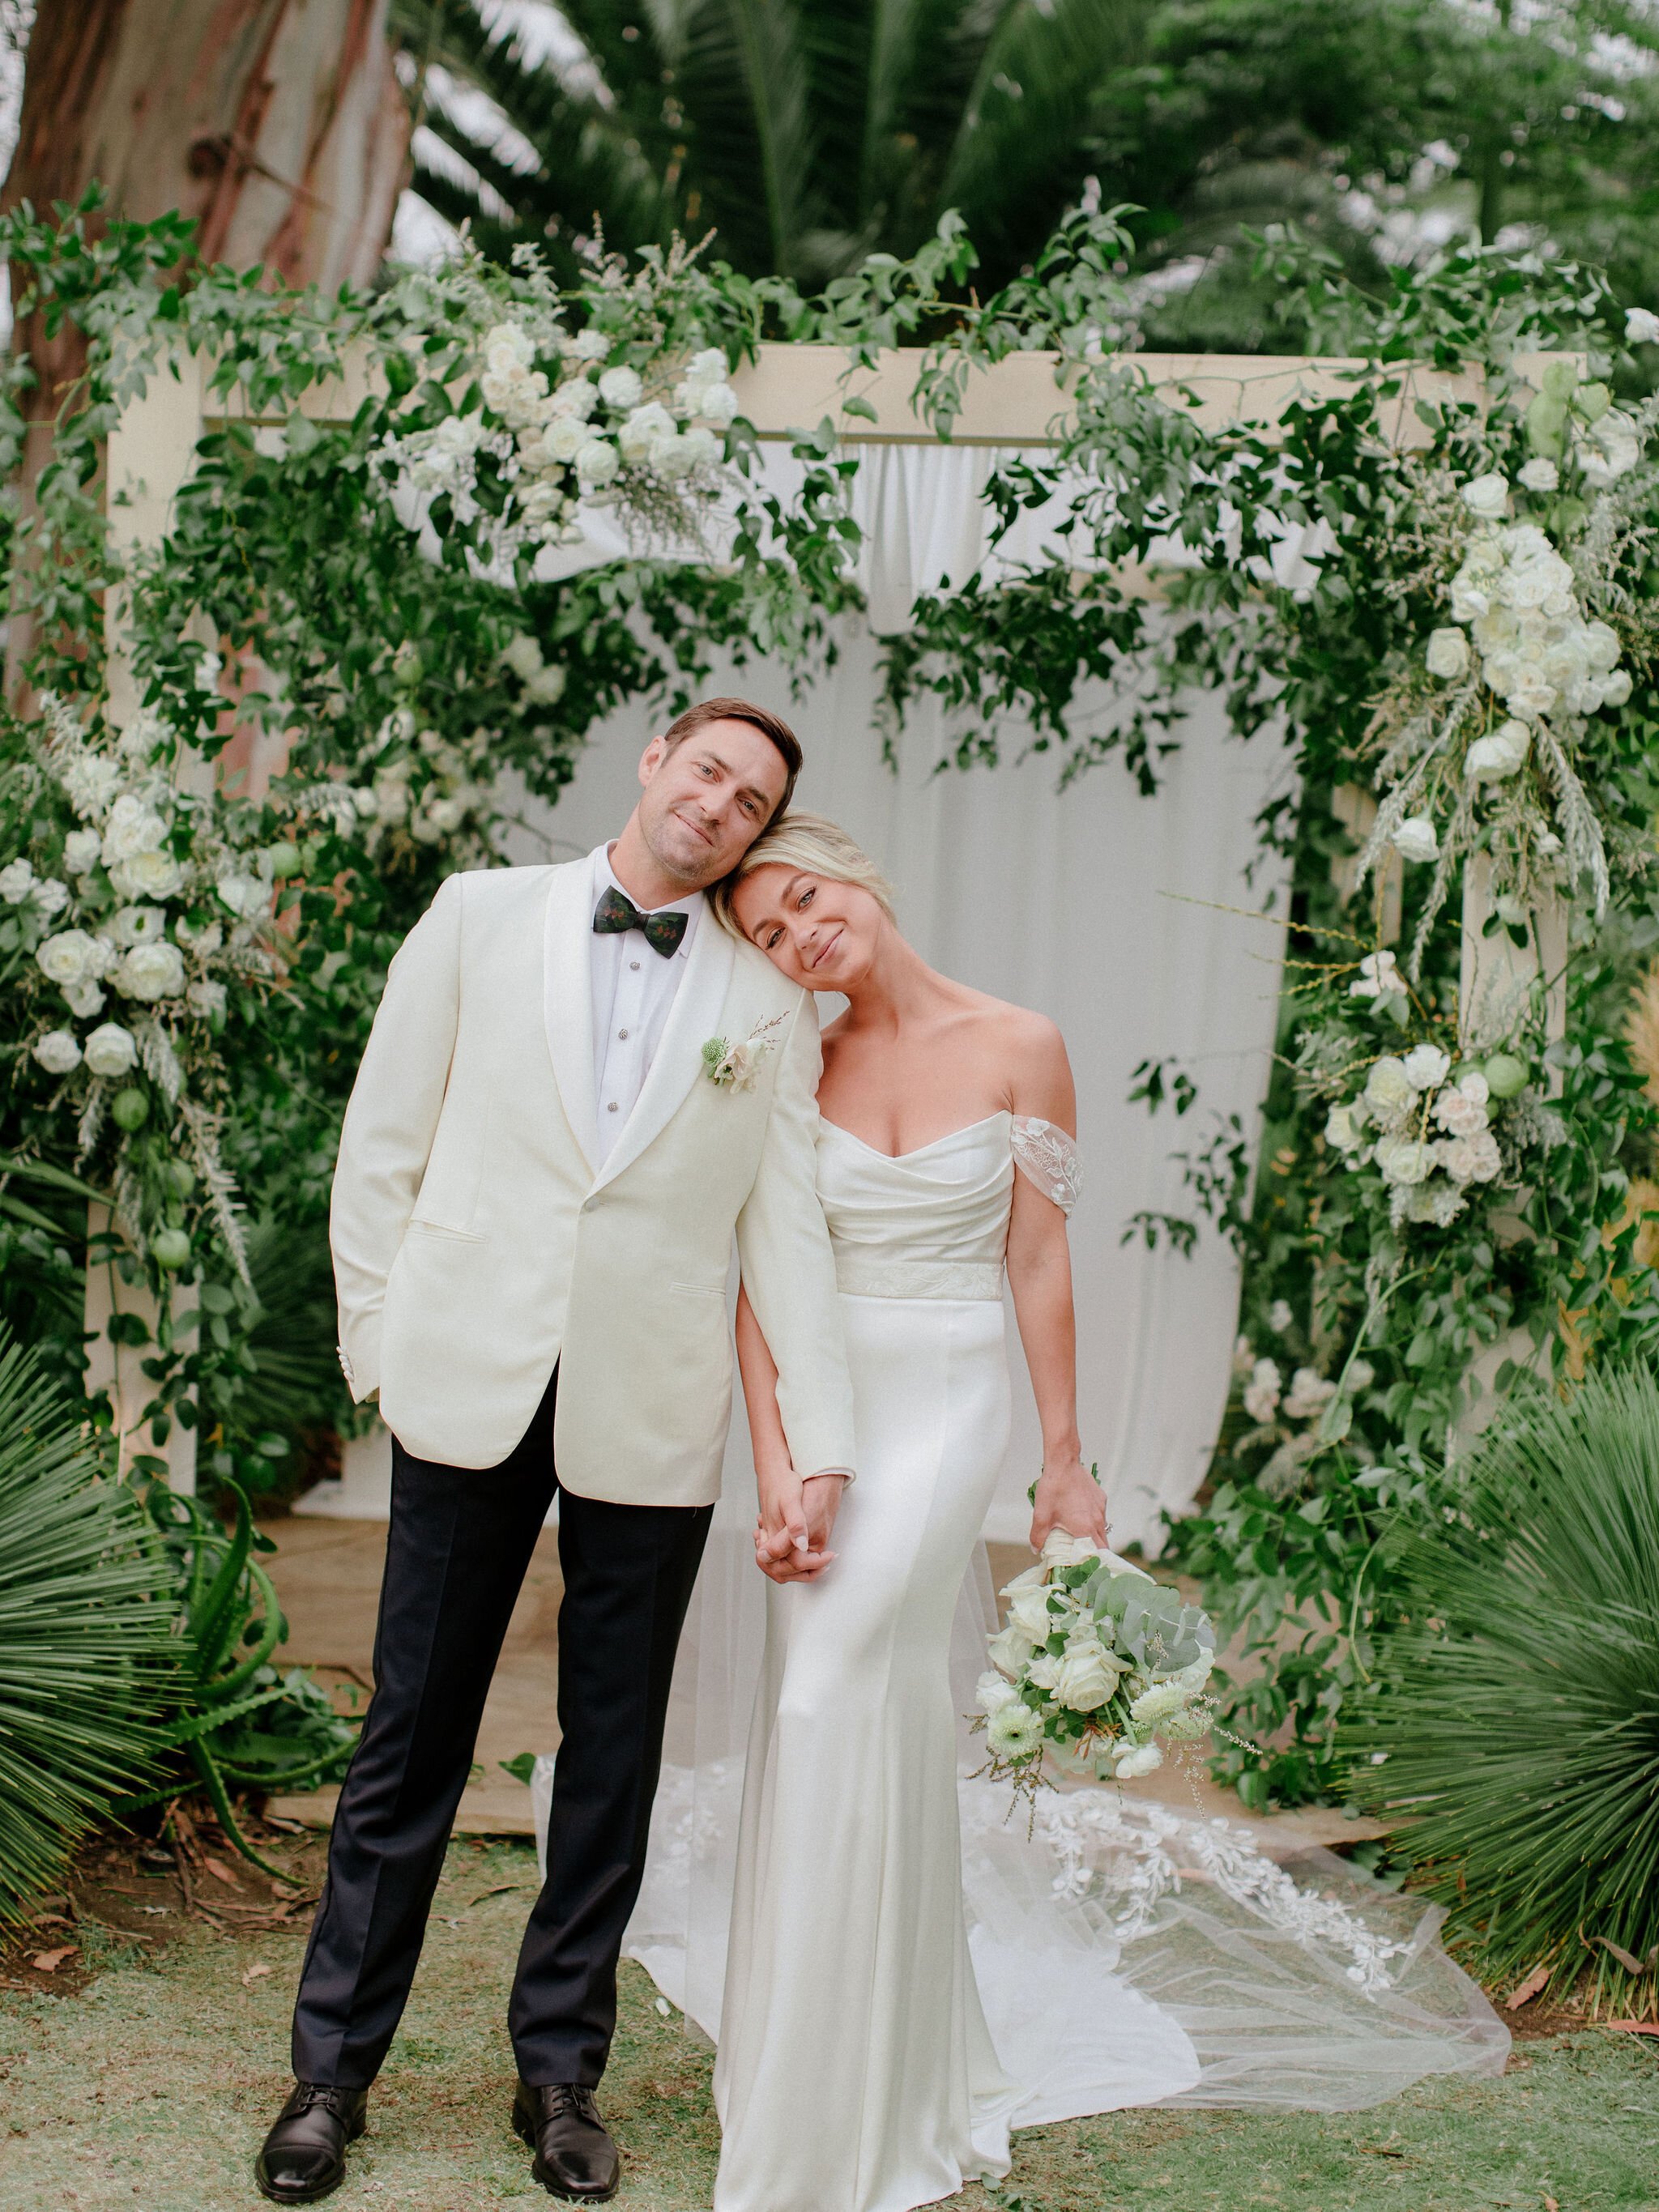 www.santabarbaraweddings.com | Chris J. Evans | Private Residence | Ashley Chanel Events | Rogue &amp; Fox | The Makeup Papi | Bride and Groom in Front of Wedding Arch 